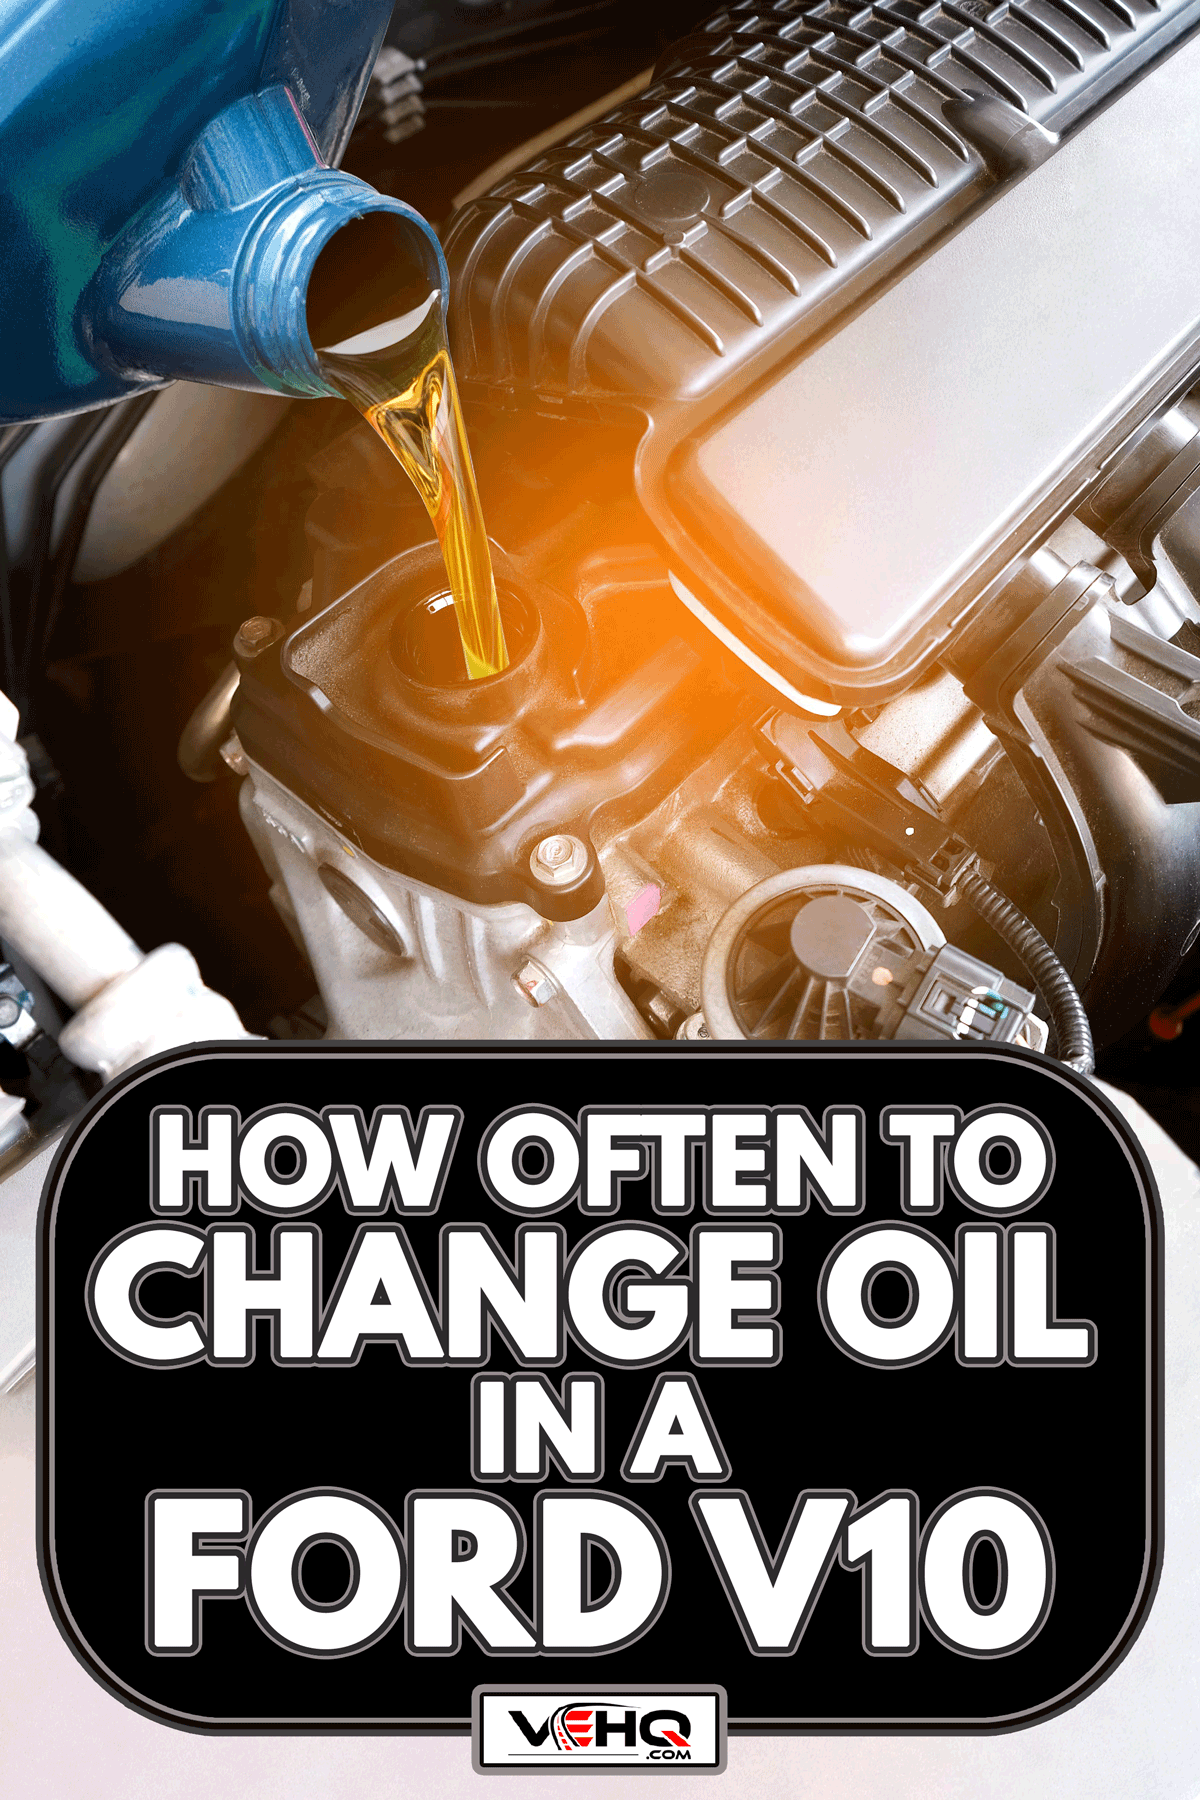 Refueling and pouring oil quality into the engine motor, How Often To Change Oil In A Ford V10